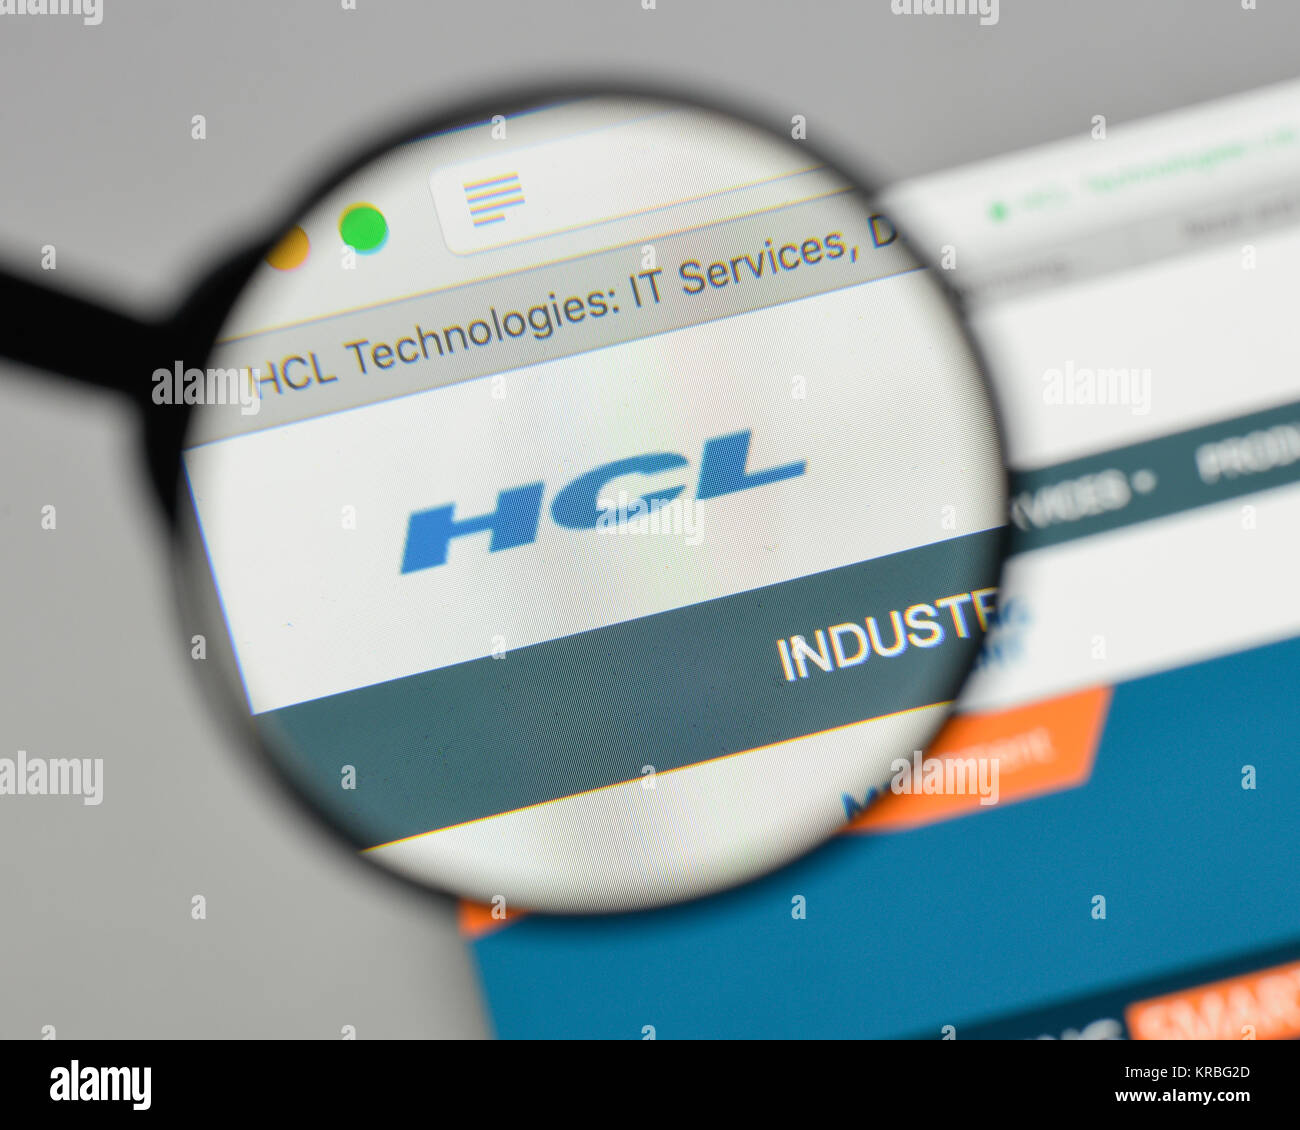 Milan, Italy - August 10, 2017: HCL Technologies logo on the website homepage. Stock Photo